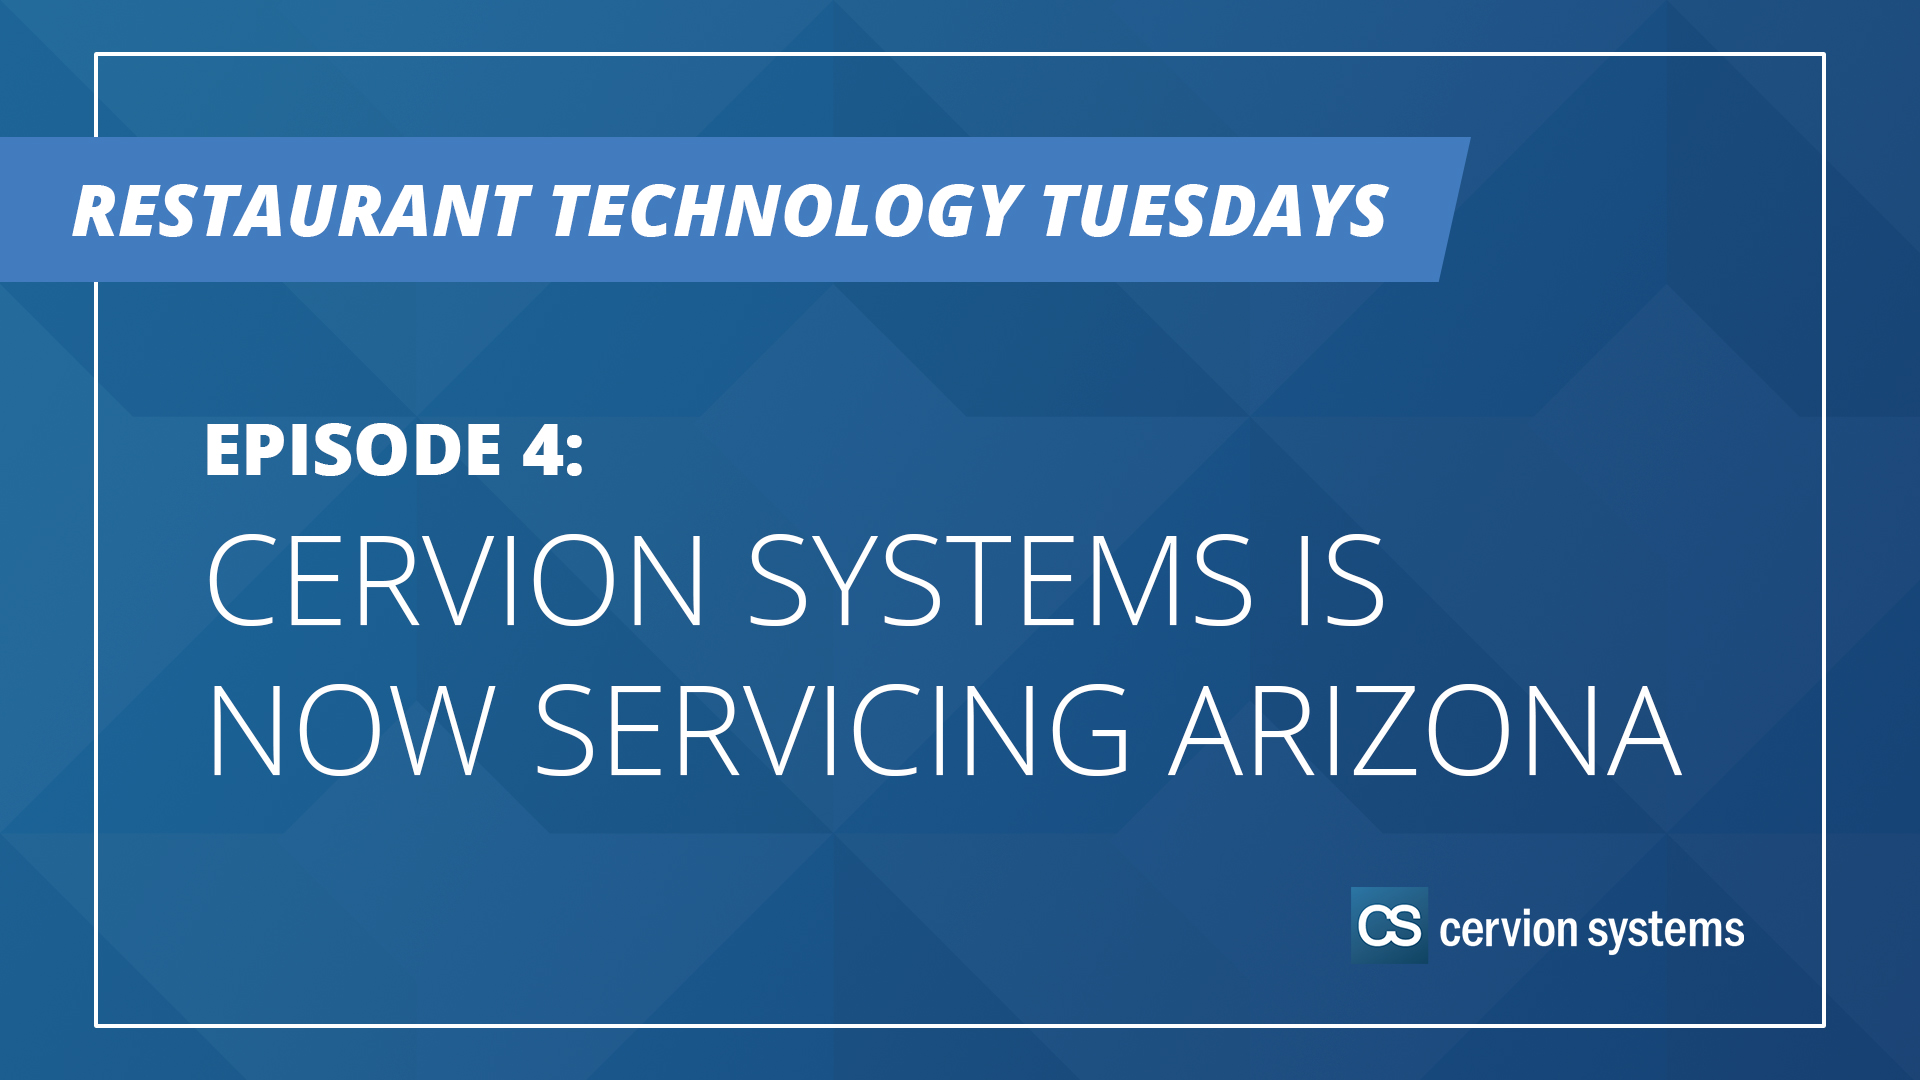 cervion-systems-now-servicing-arizona